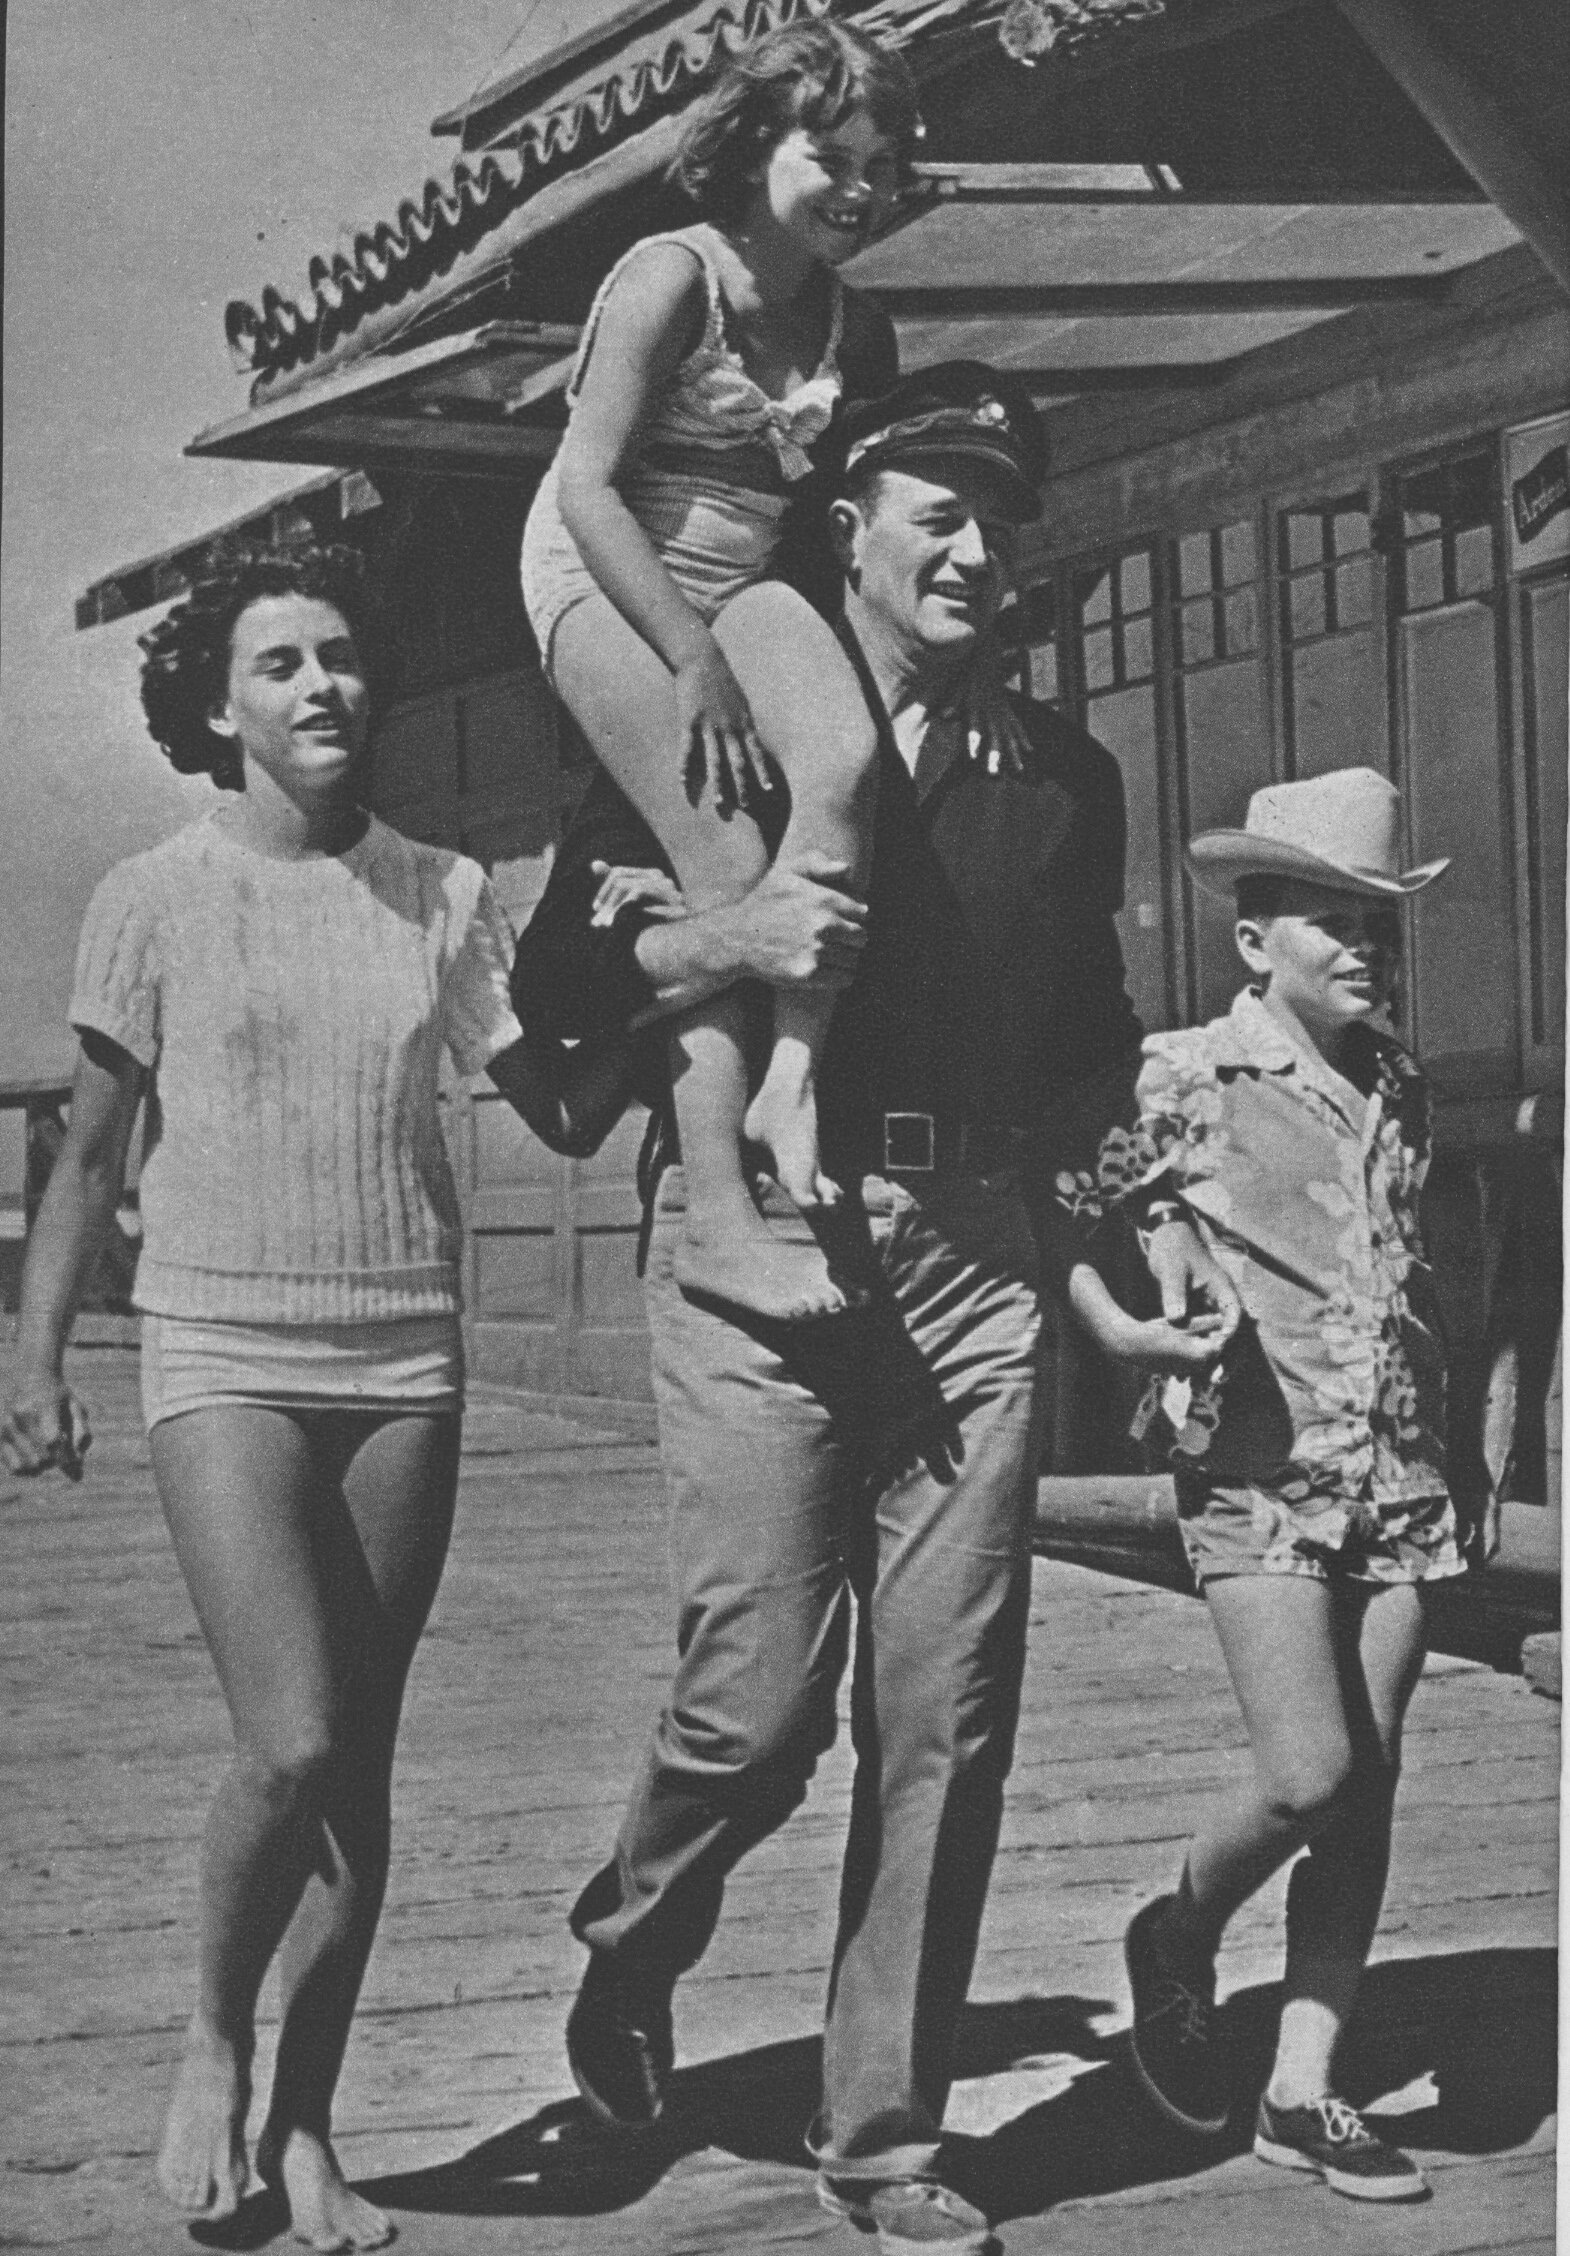 Some of Duke’s most adoring fans: Toni, Melinda and Patrick (from left to right) on Catalina Island during the filming of Operation Pacific.